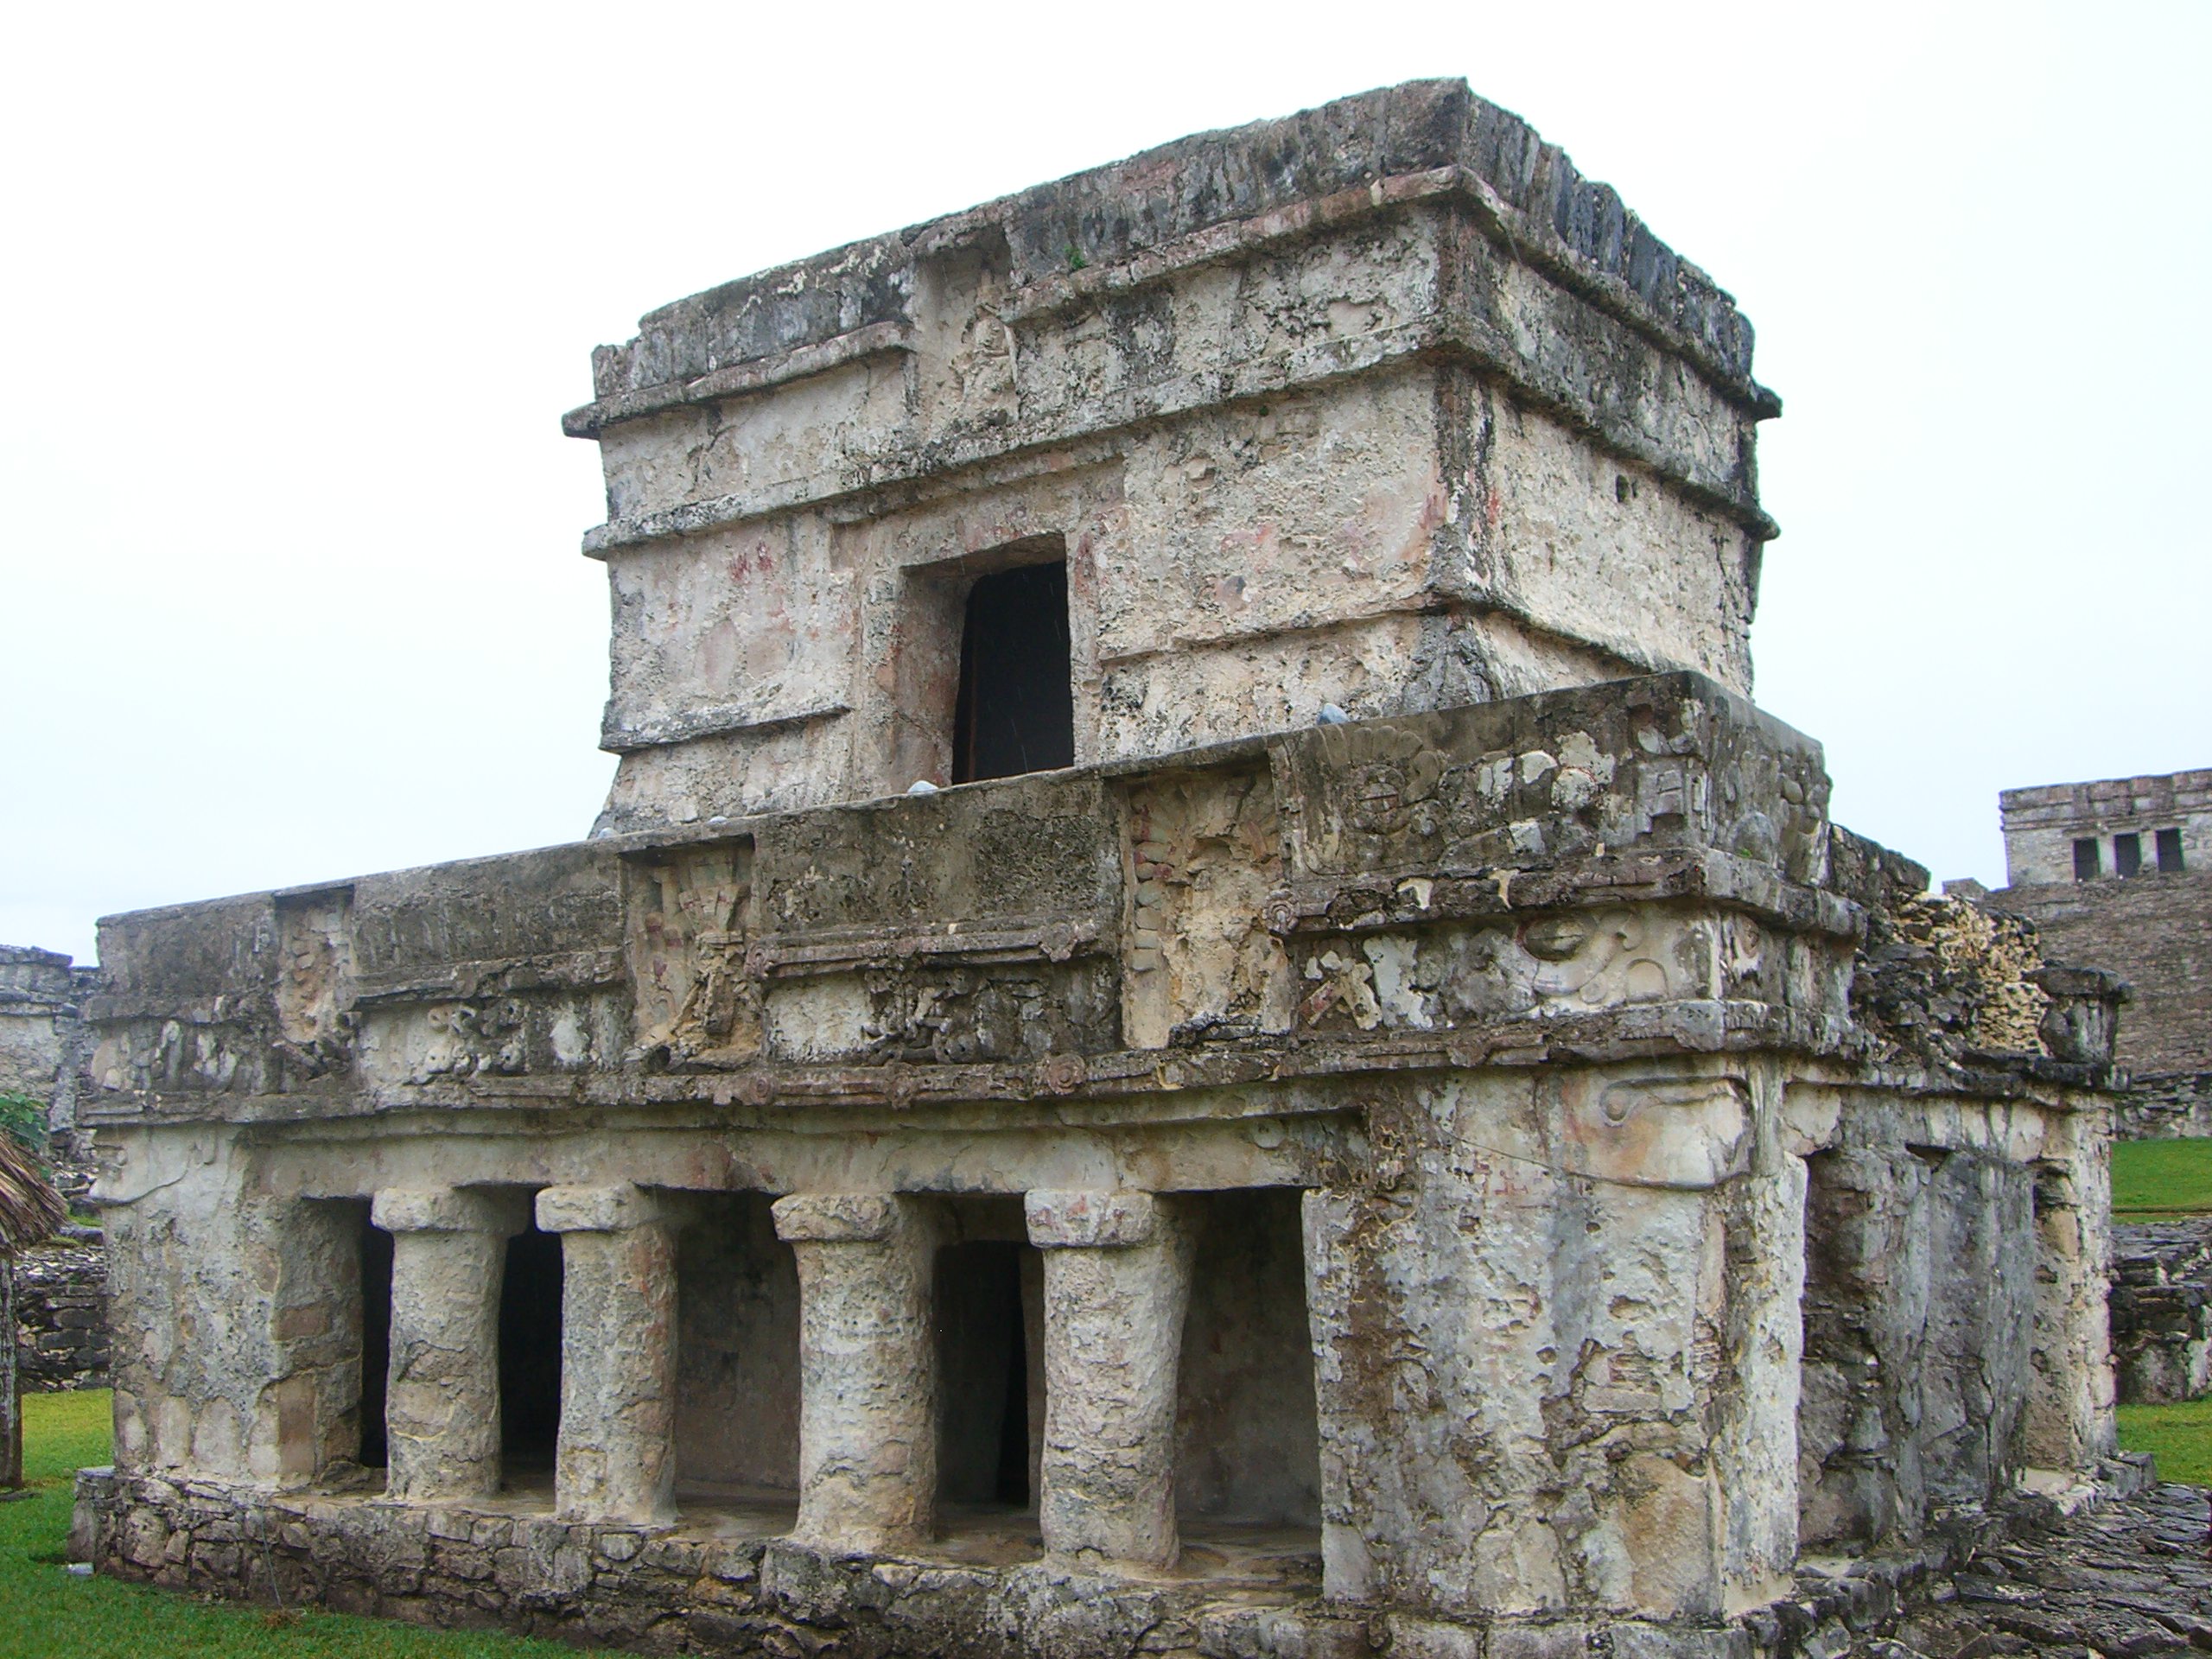 A structure with columns - Mayan ruins in Tulum